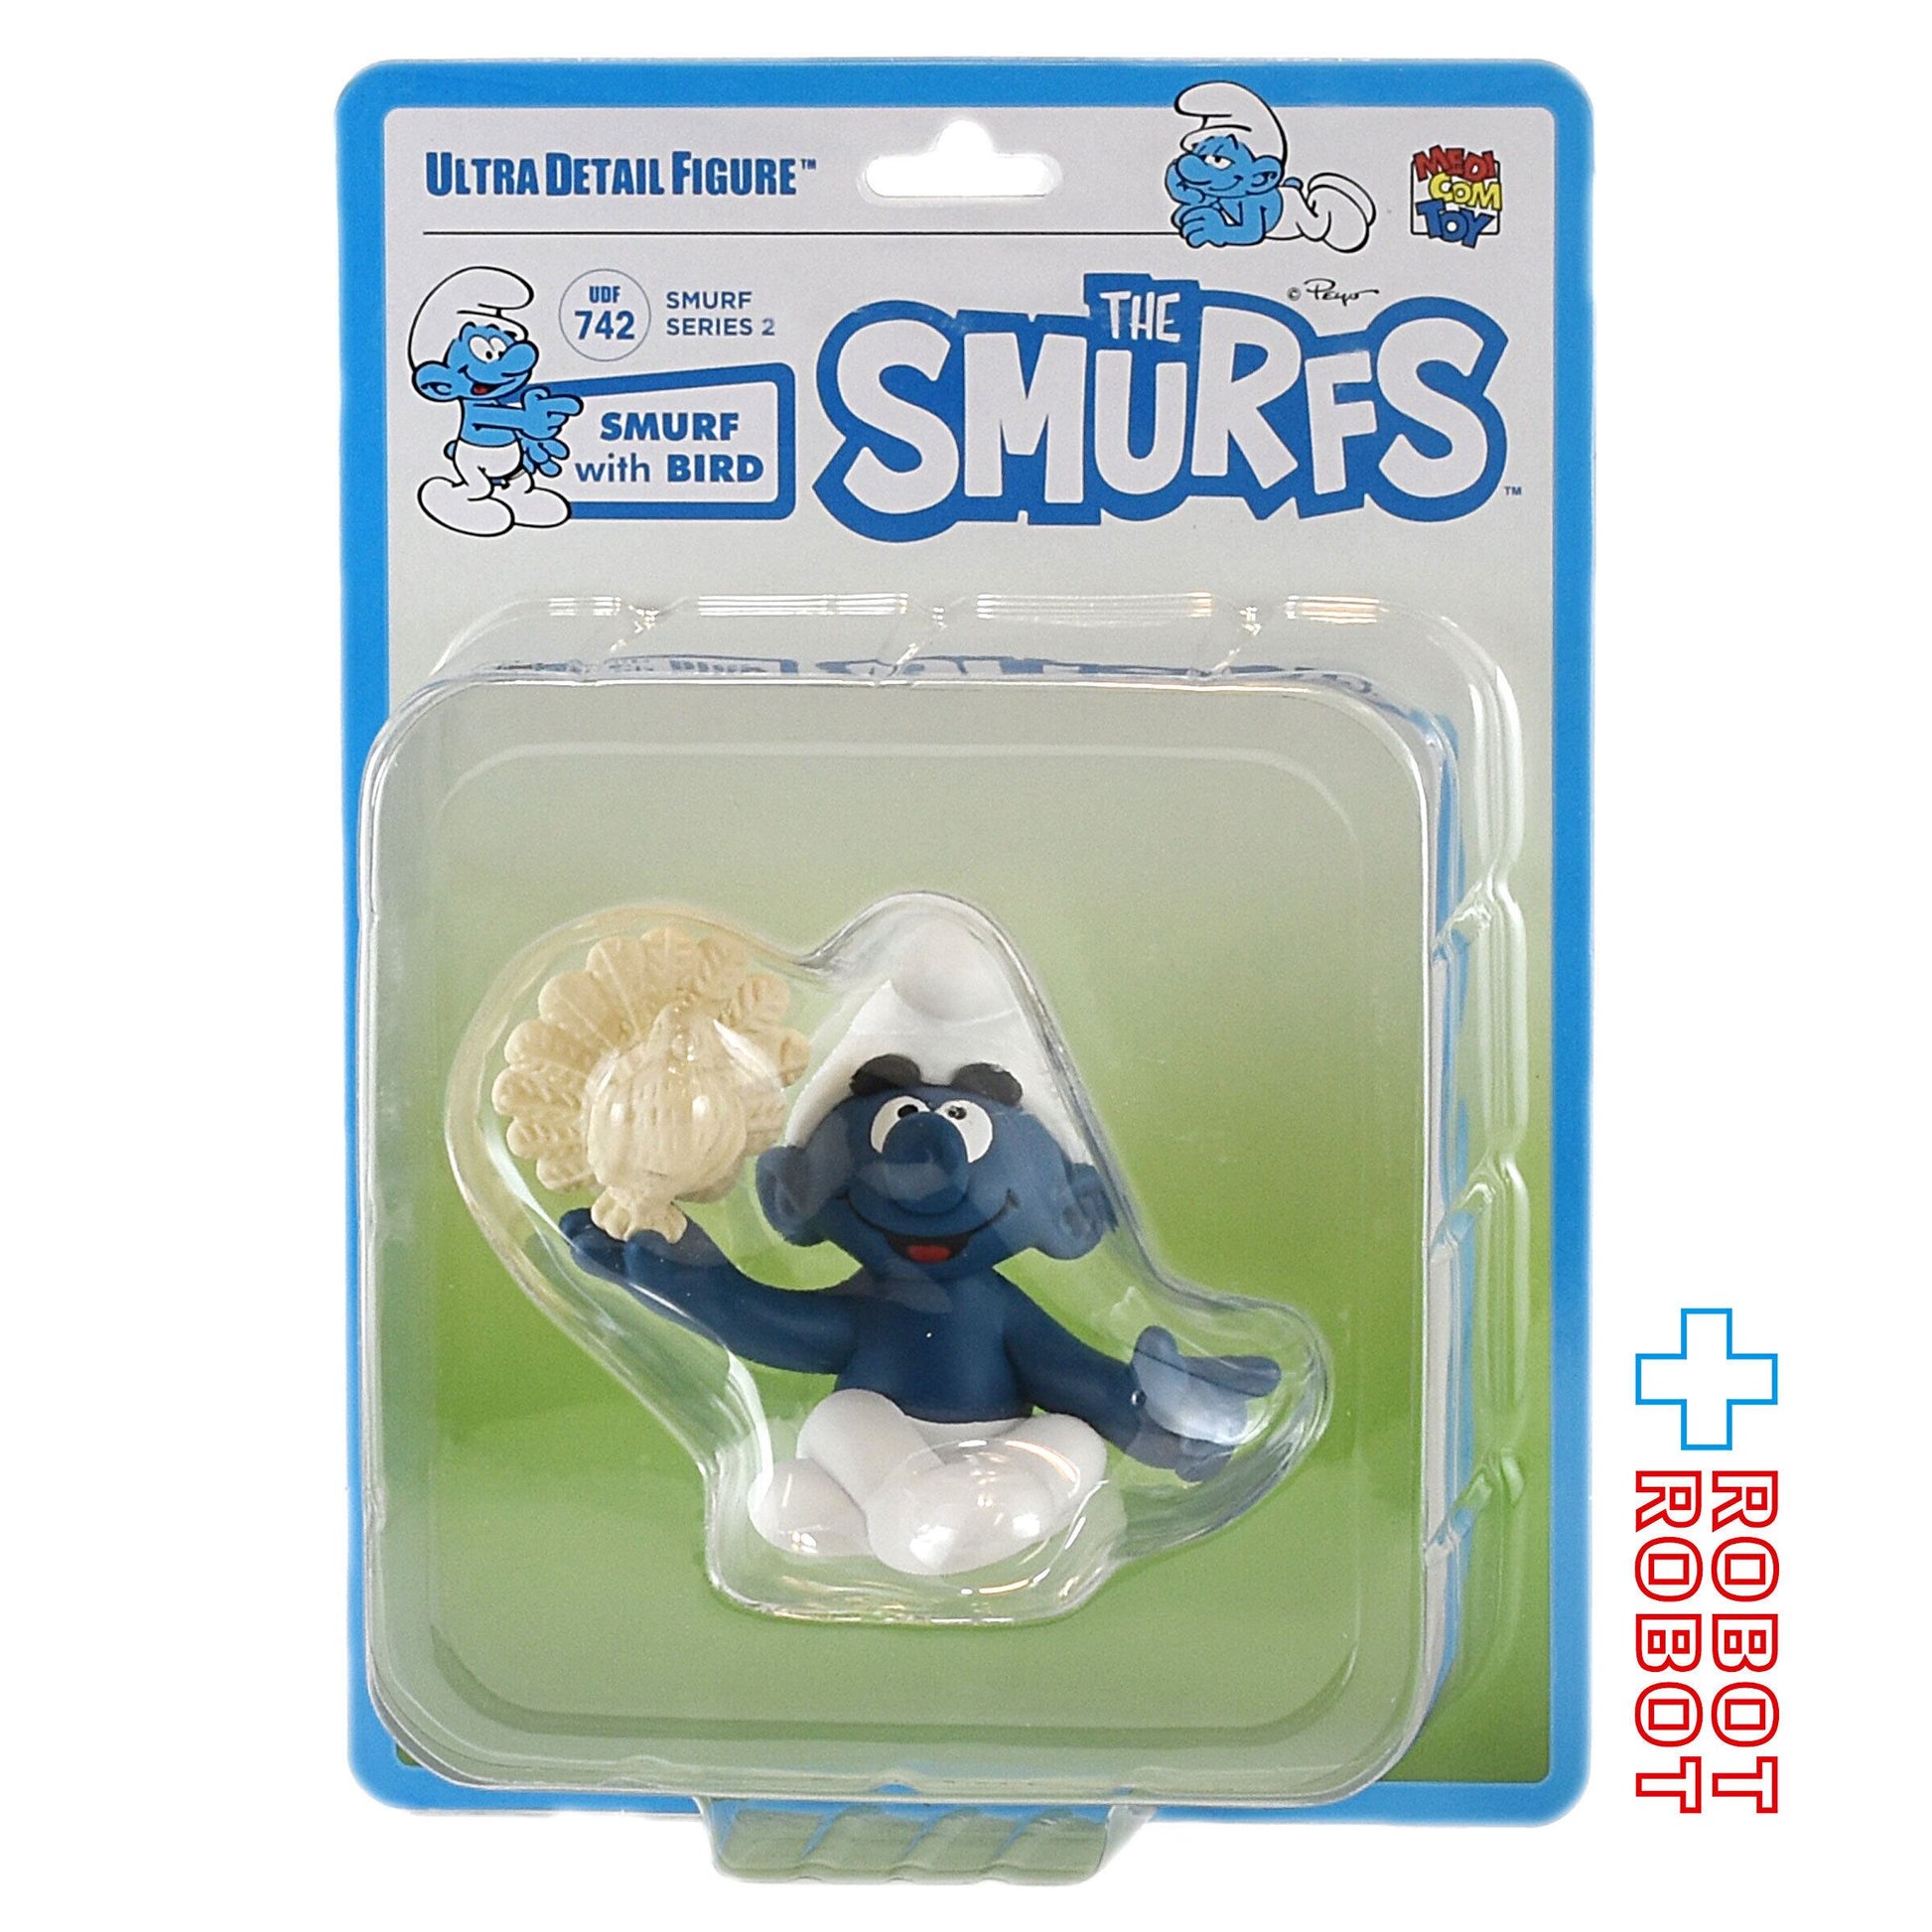  The Smurfs: Smurf with Bird Series 2 Ultra Detail